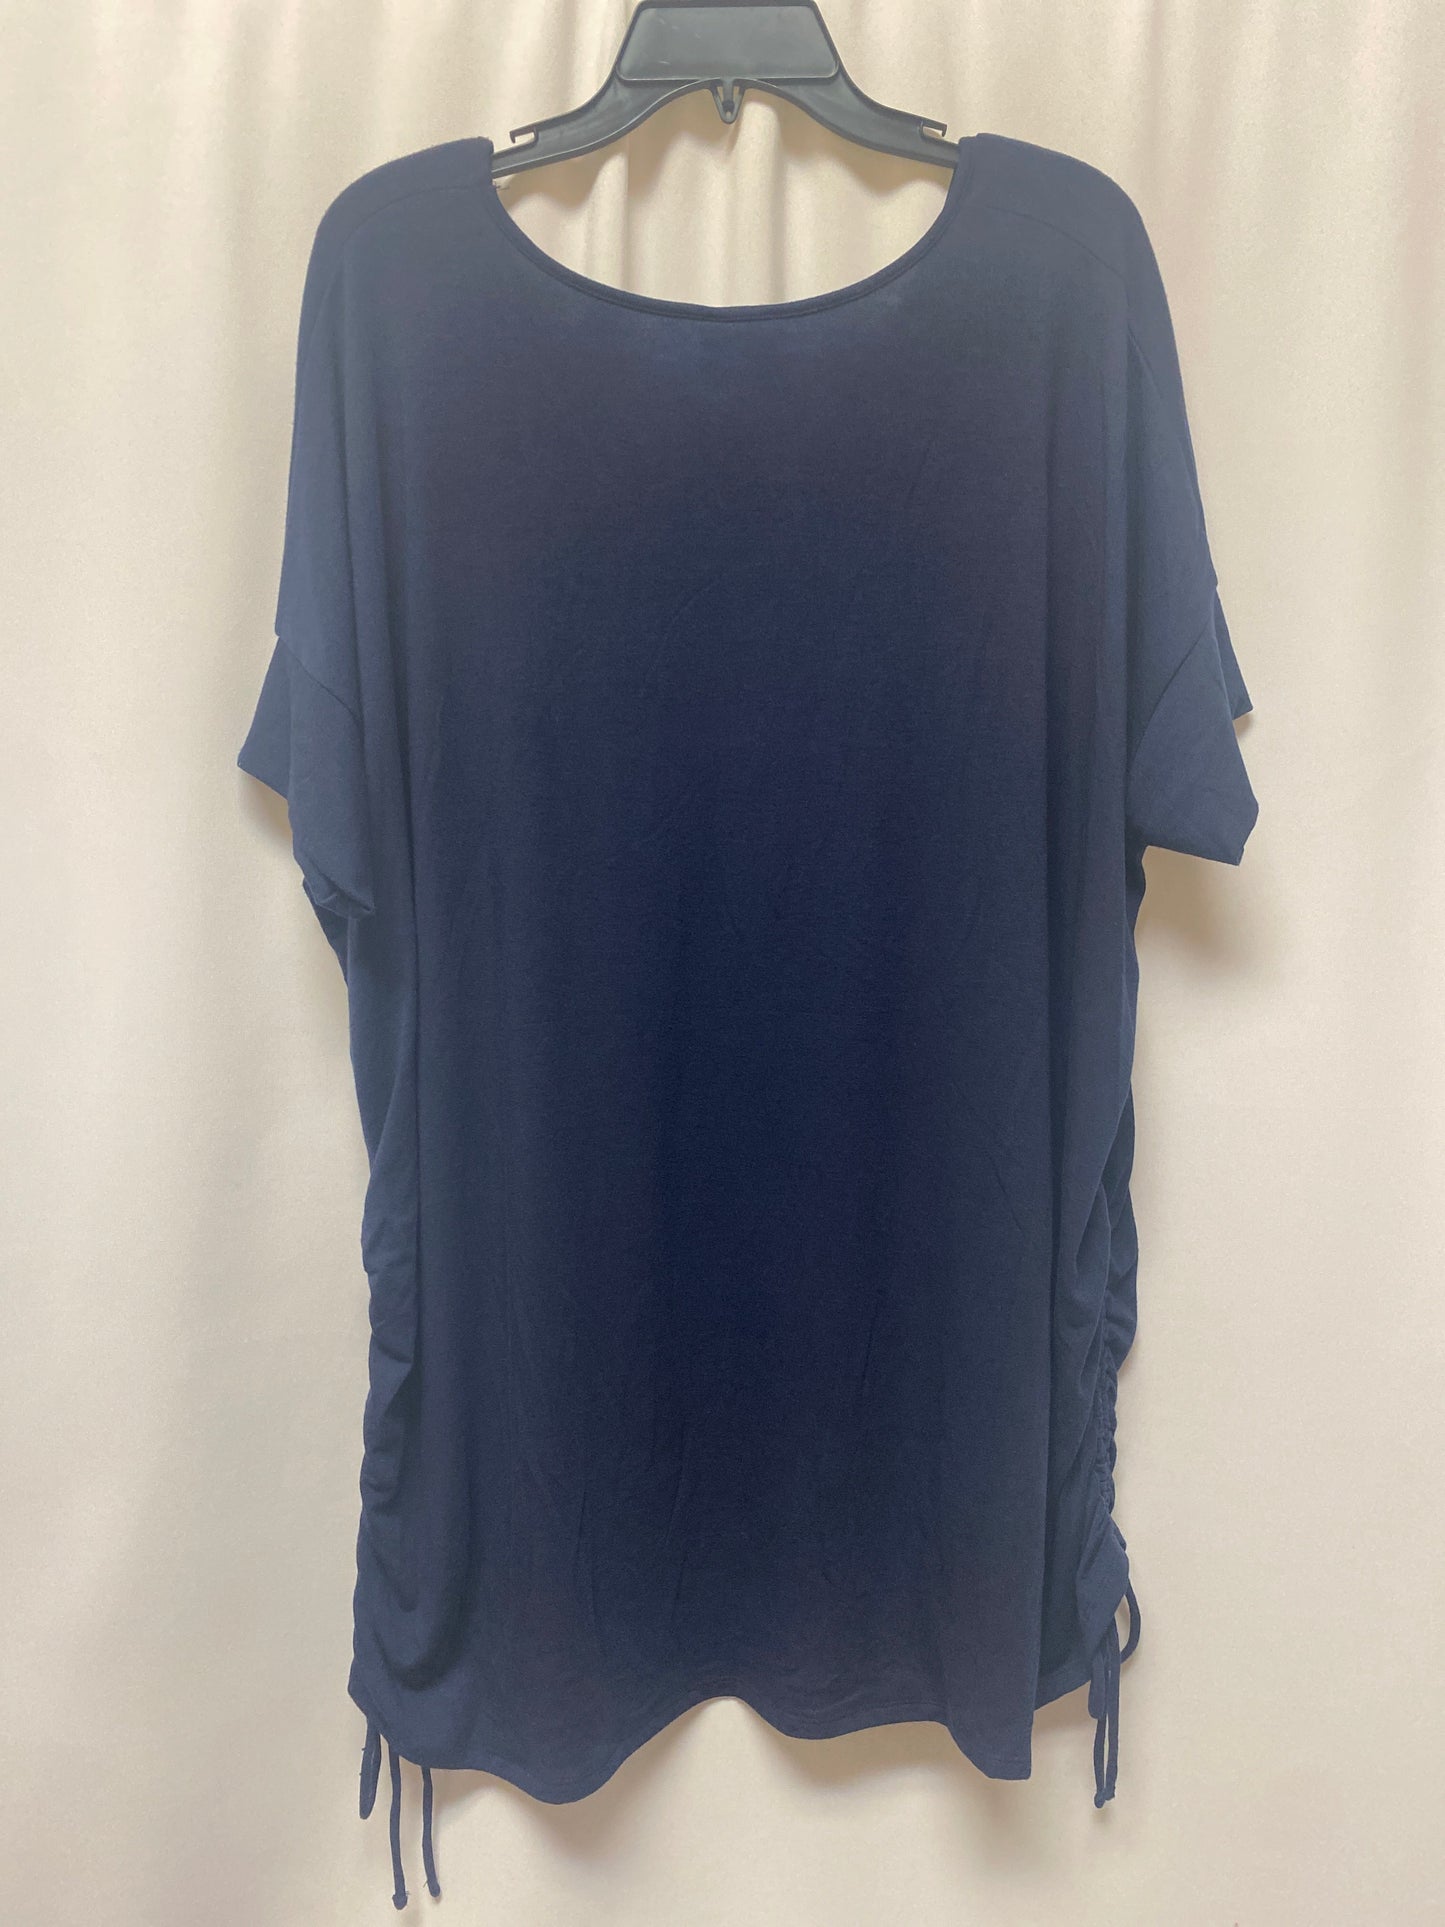 Blue Top Short Sleeve Zenana Outfitters, Size 3x